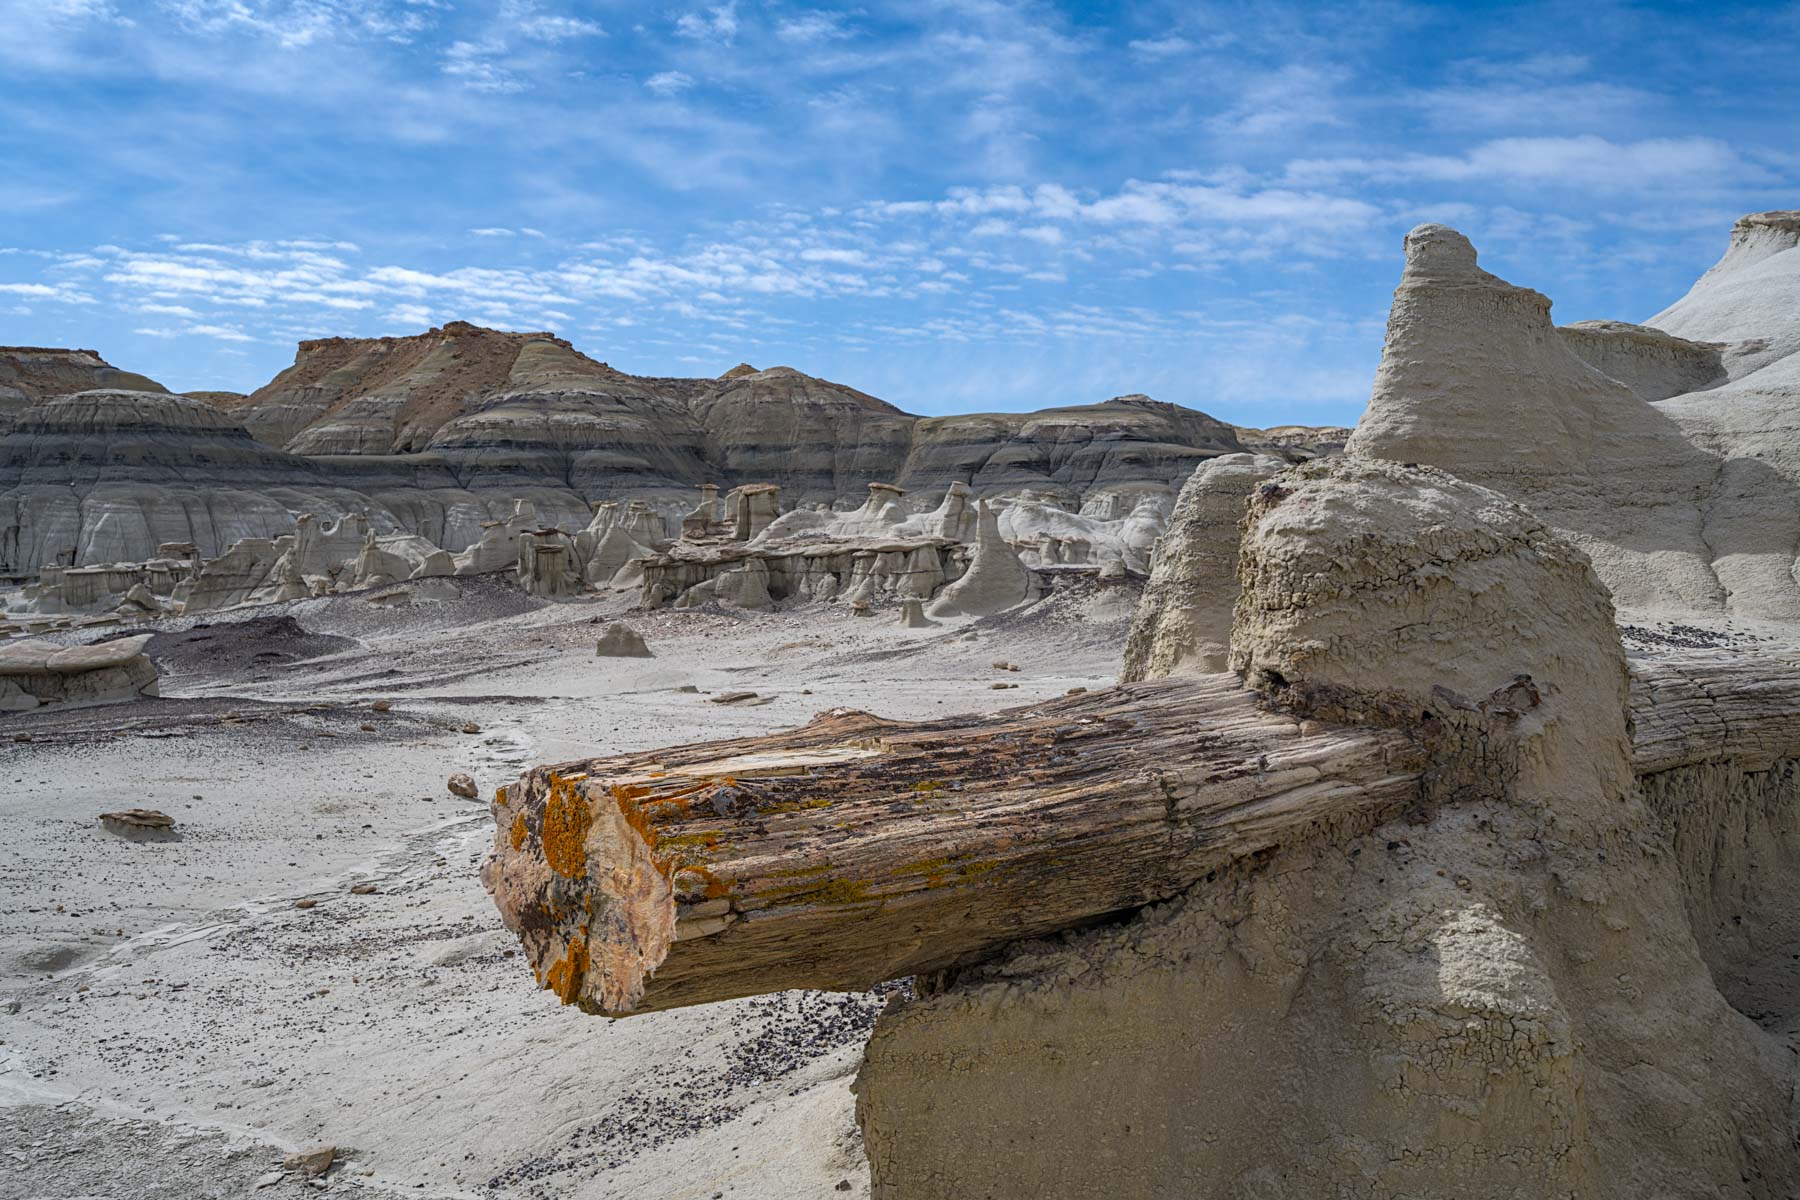 Petrified Cove, an area of long petrified logs in the Bisti Badlands